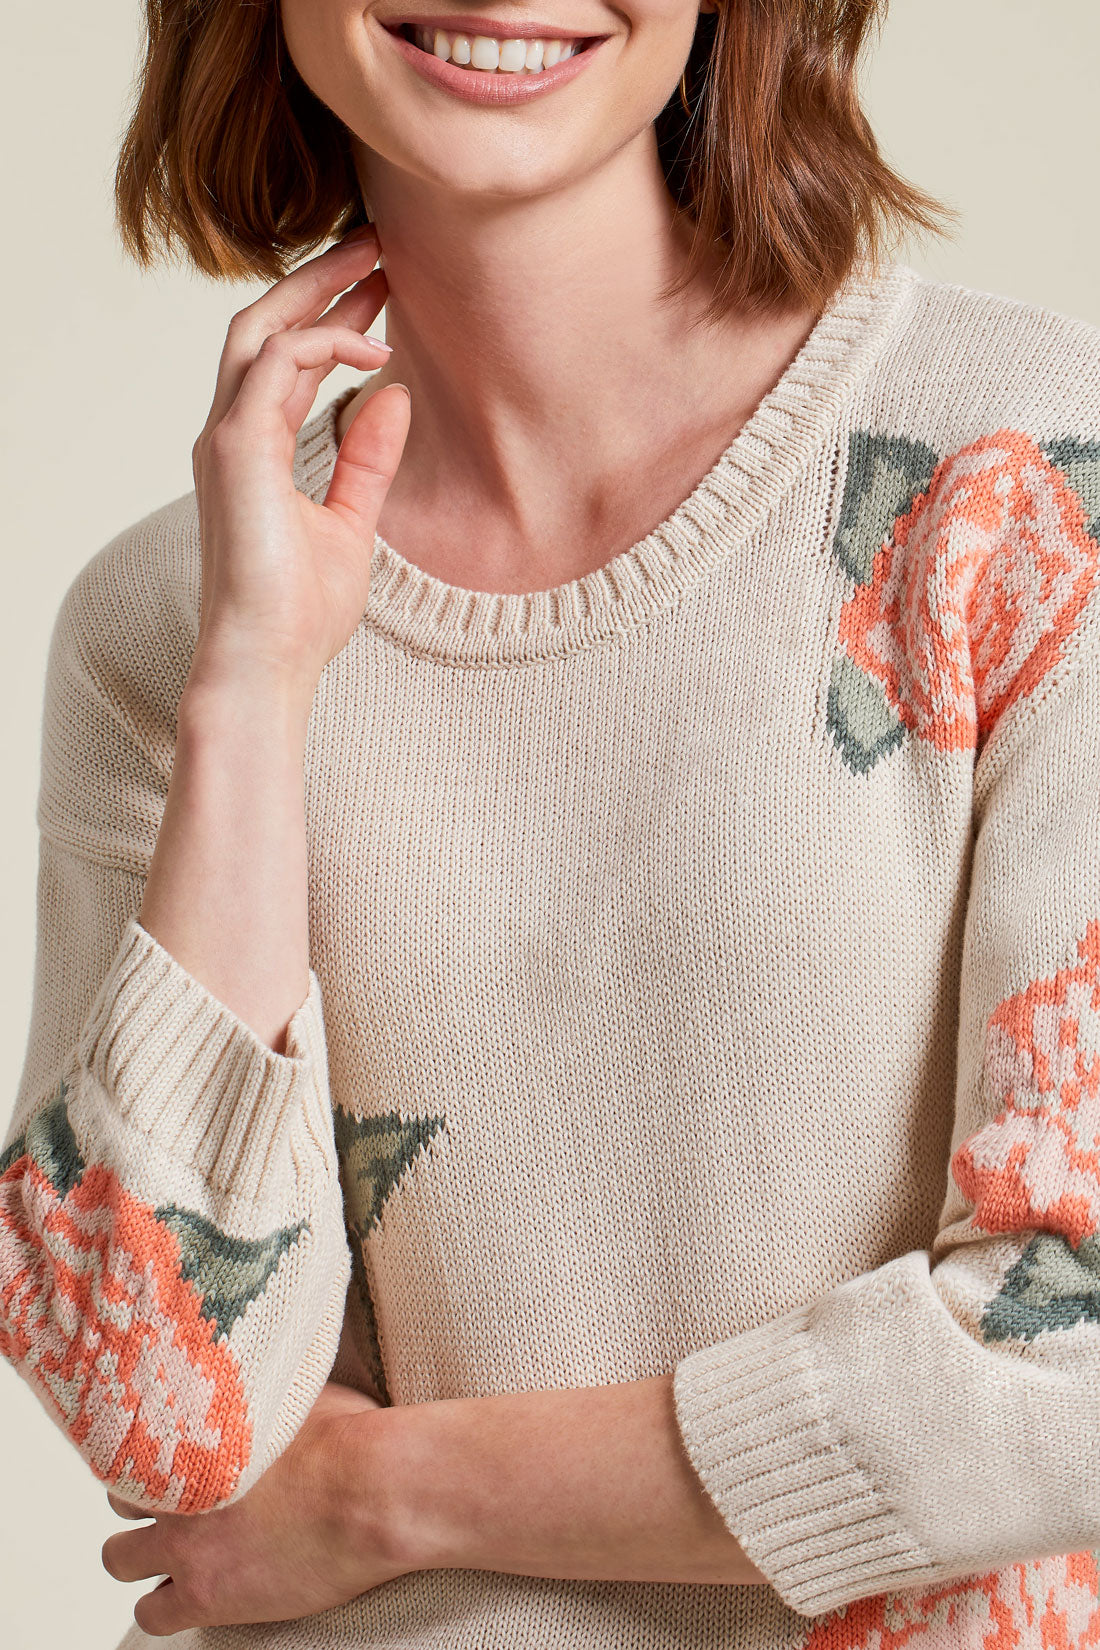 Flax Sweater with Floral Detail by Tribal